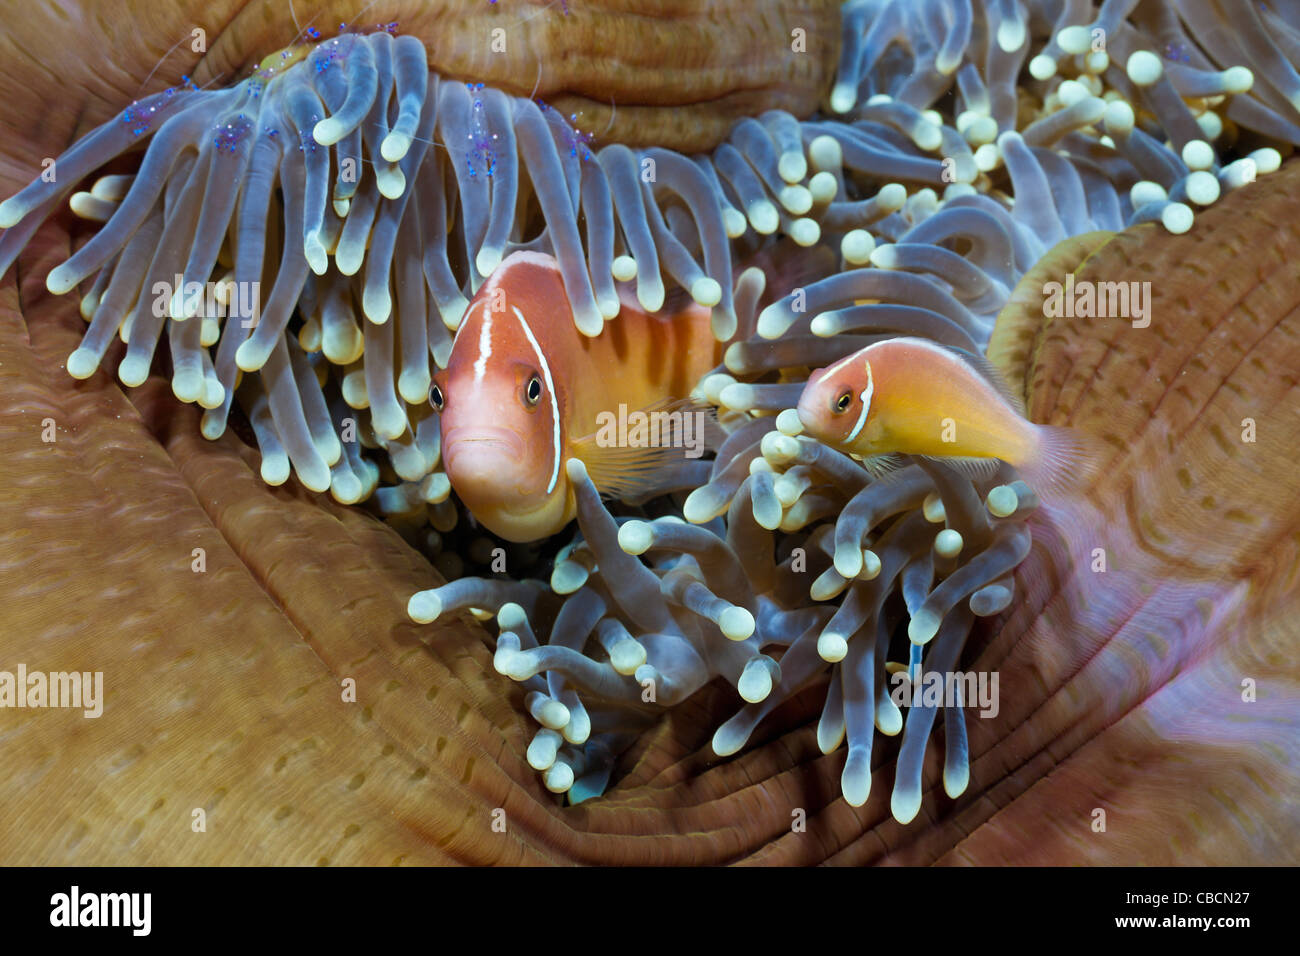 Pink Anemonefish Sea Anemone Amphiprion perideraion, Heteractis magnifica, West Papua, Indonesia symbiosis clownfish Stock Photo